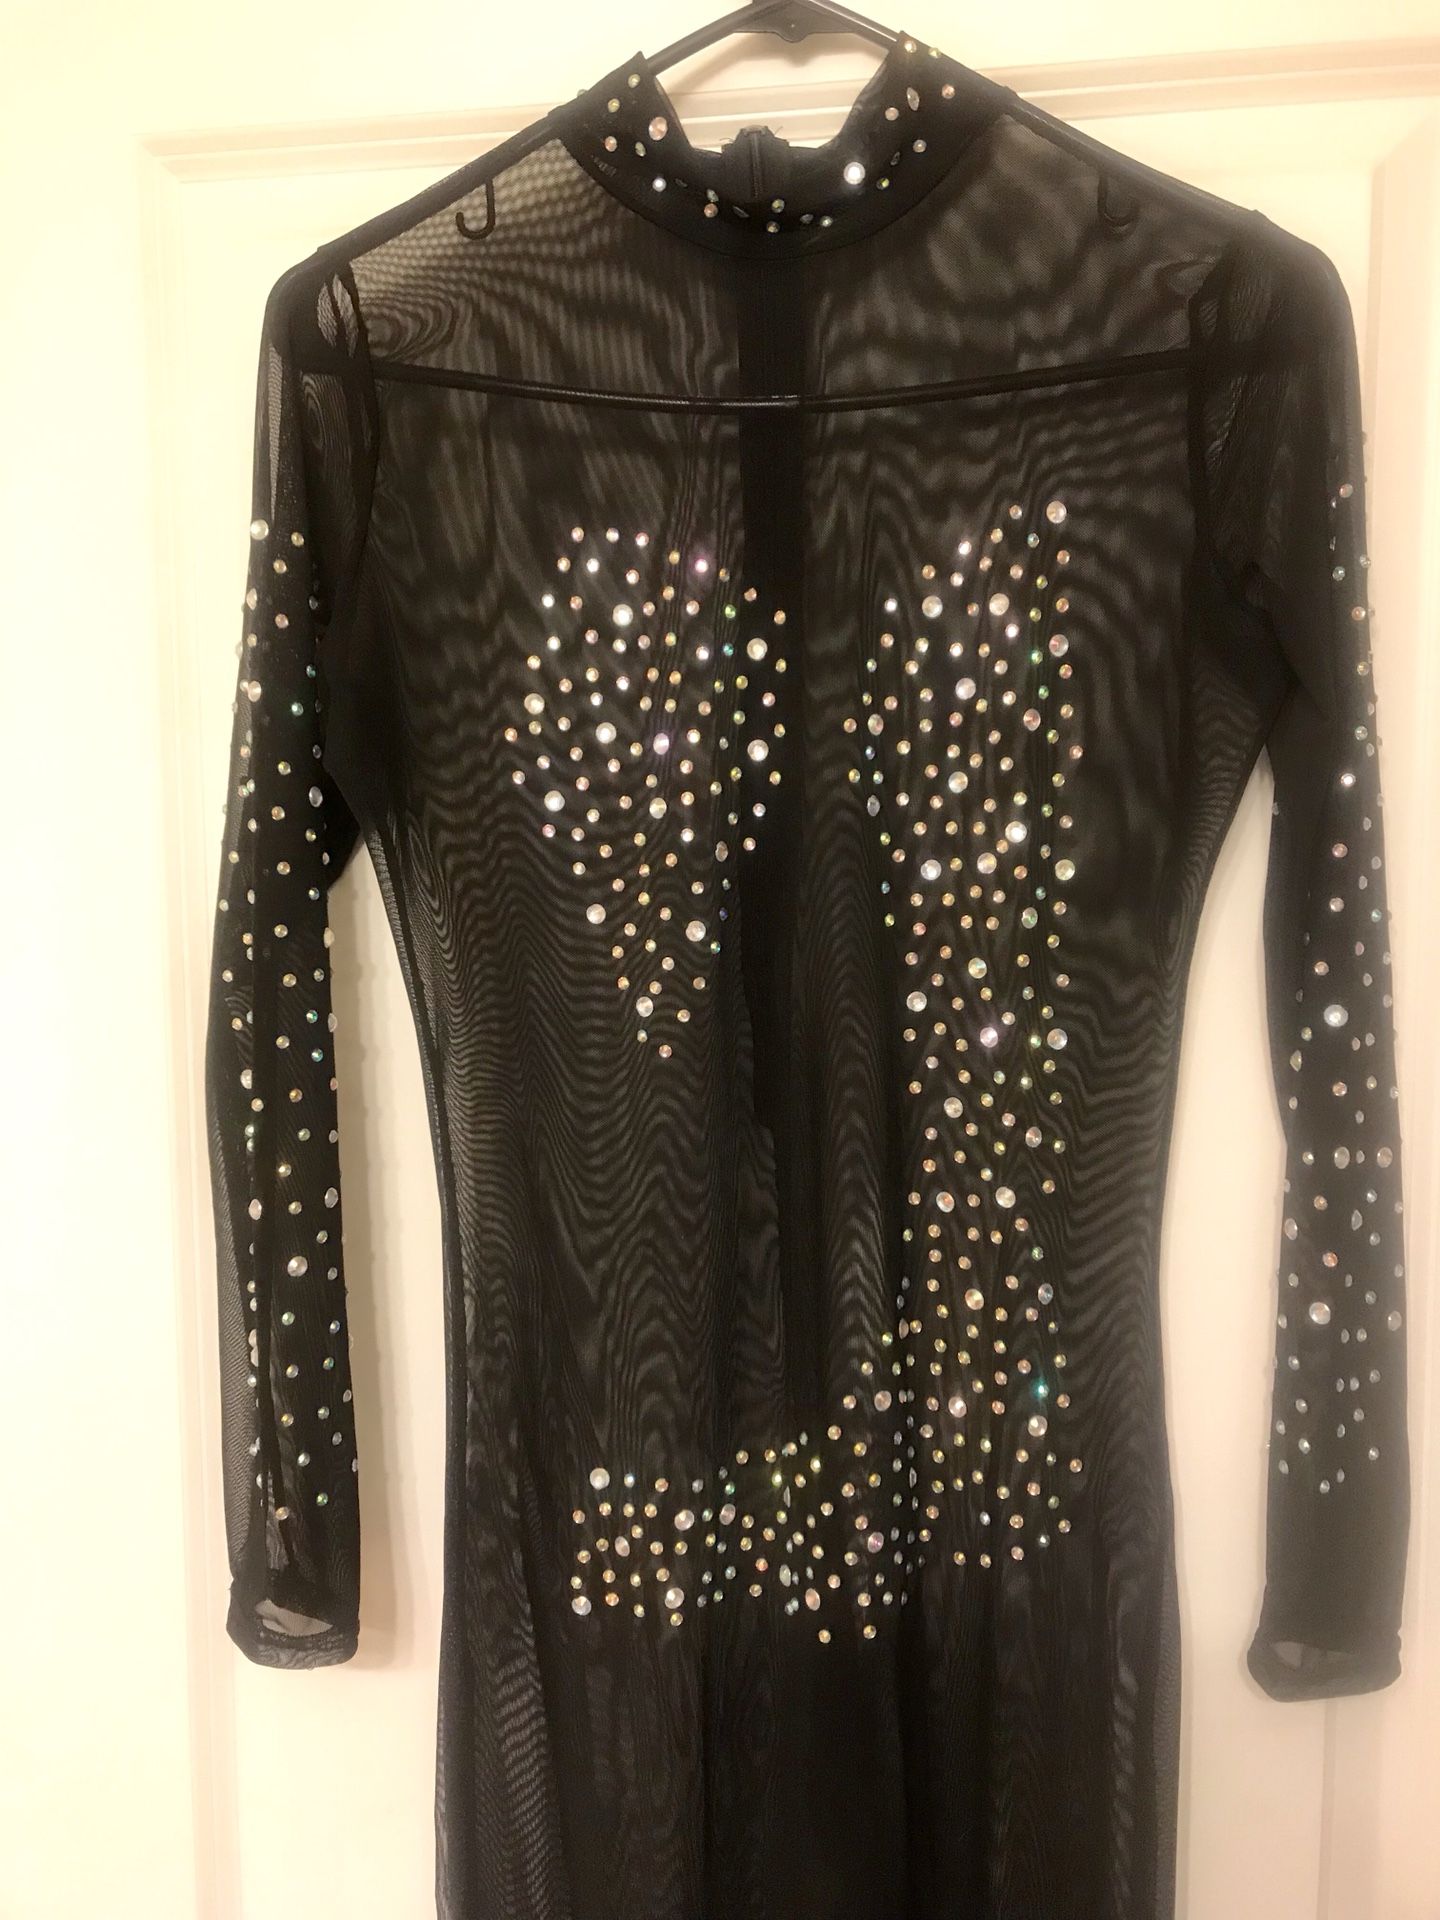 Sheer, studded body suit